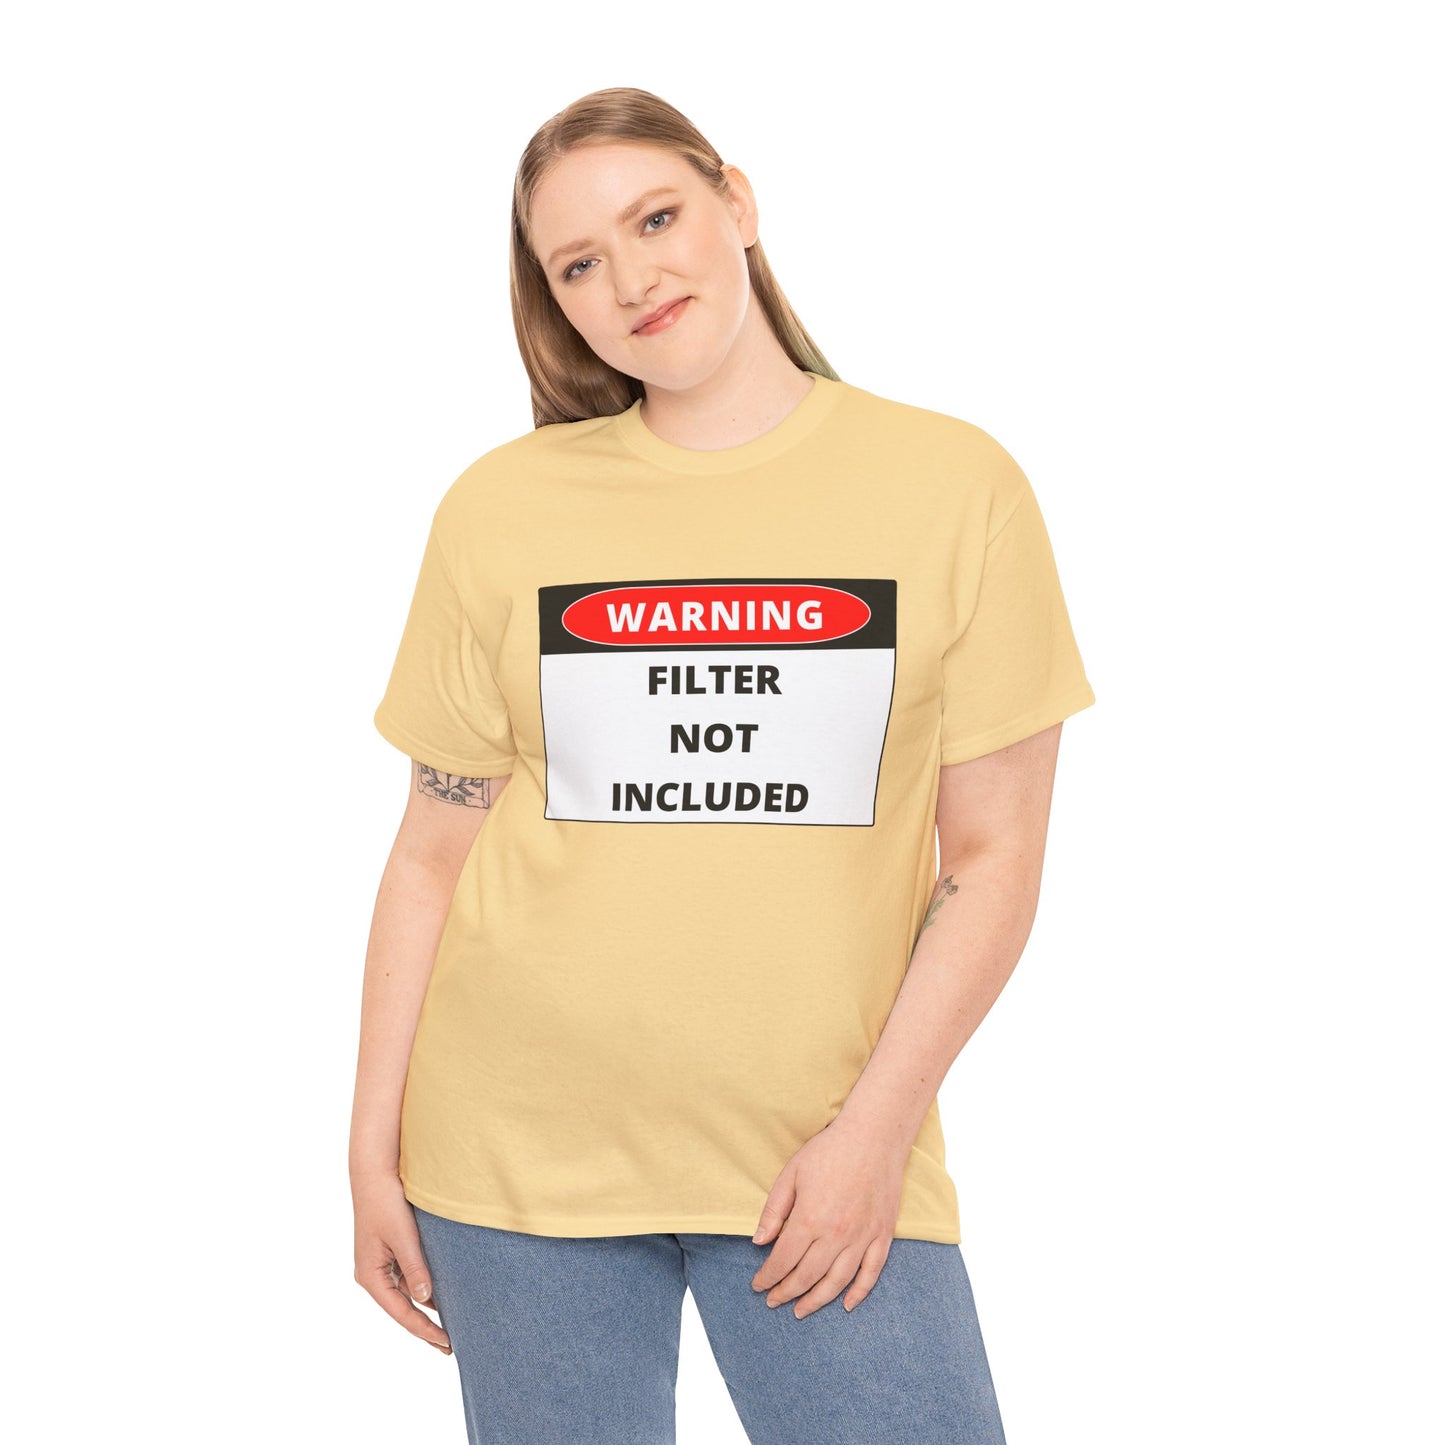 "Warning: Filter Not Included" Unisex T-Shirt - Wear Your Candid Attitude with Pride! Unisex Heavy Cotton Tee